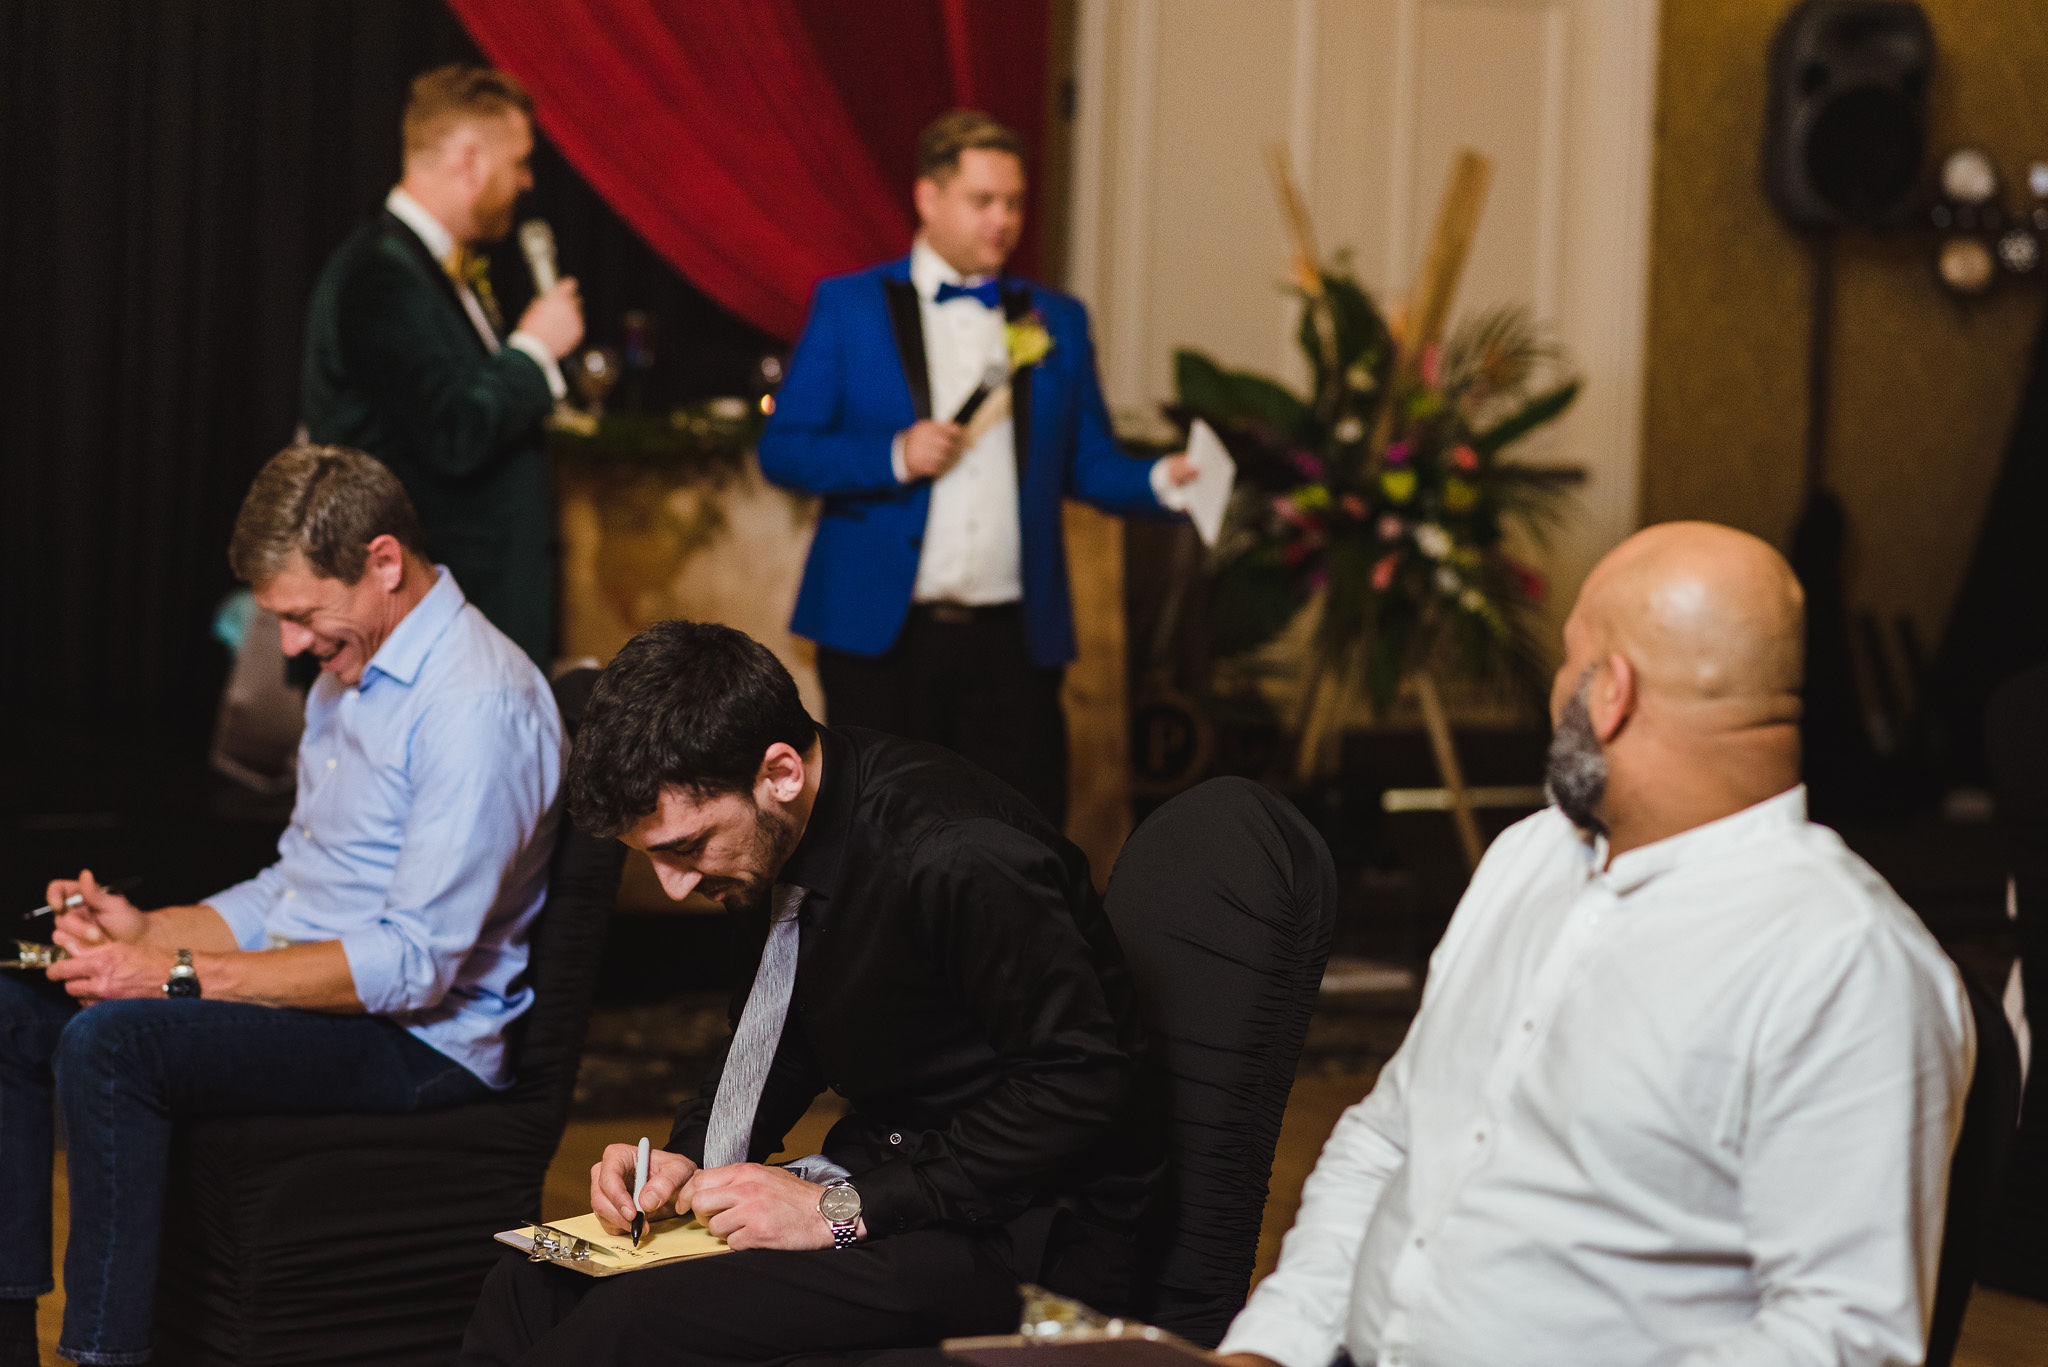 grooms reading game instructions into their microphones while seated guests are scribbling away on clipboards during a fun wedding at the Hilton Fallsview in Niagara Falls